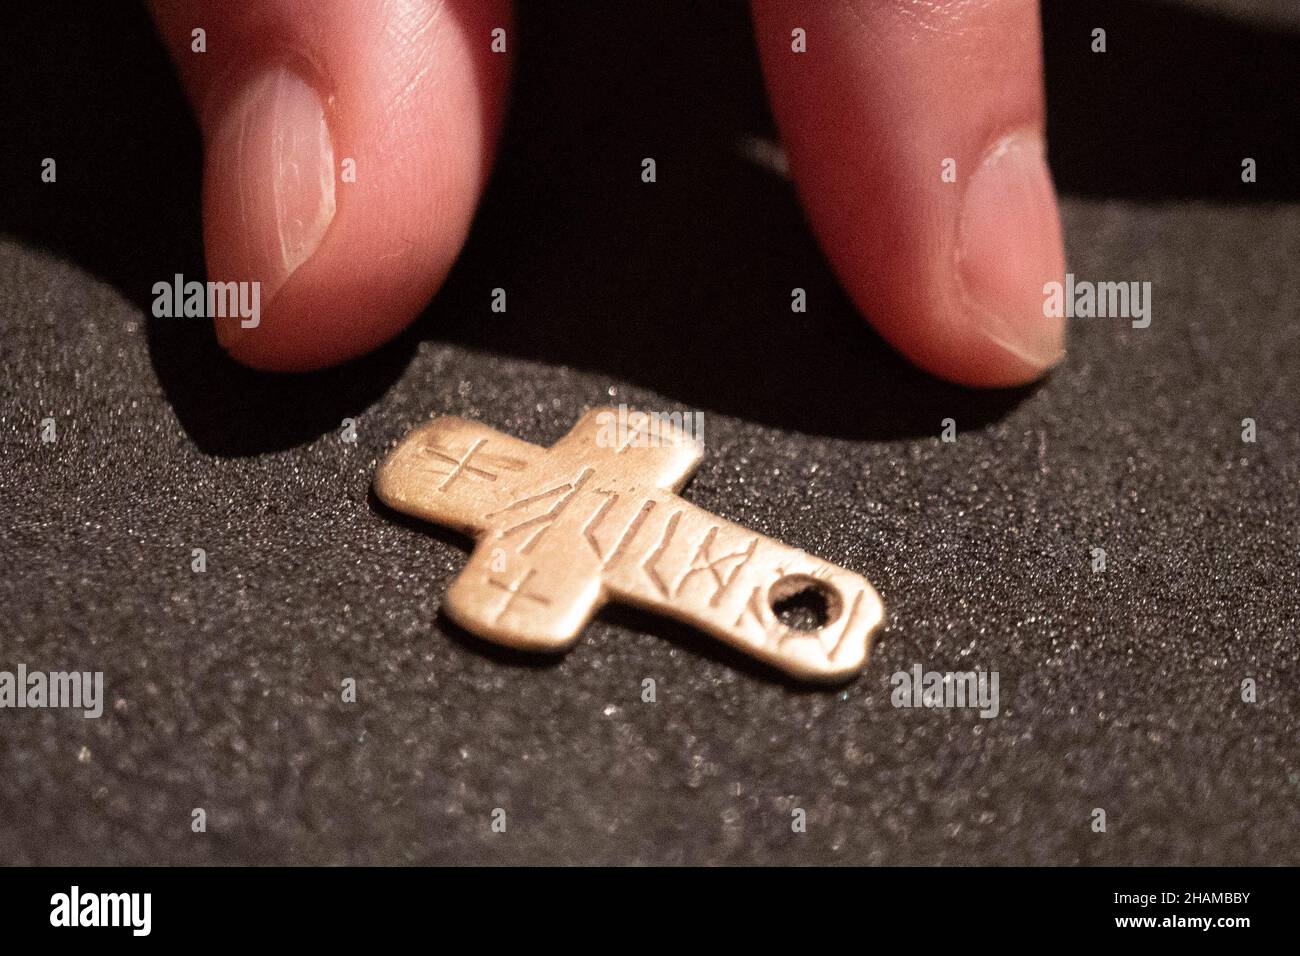 London, UK. 14th December, 2021. A unique gold cross with a runic inscription, one of various archaeological discoveries made by members of the public to be displayed at the British Museum. These finds are recorded under the British Museum’s Portable Antiquities Scheme (PAS) and Treasure annual reports. Photo: Richard Gray/Alamy Live News Stock Photo